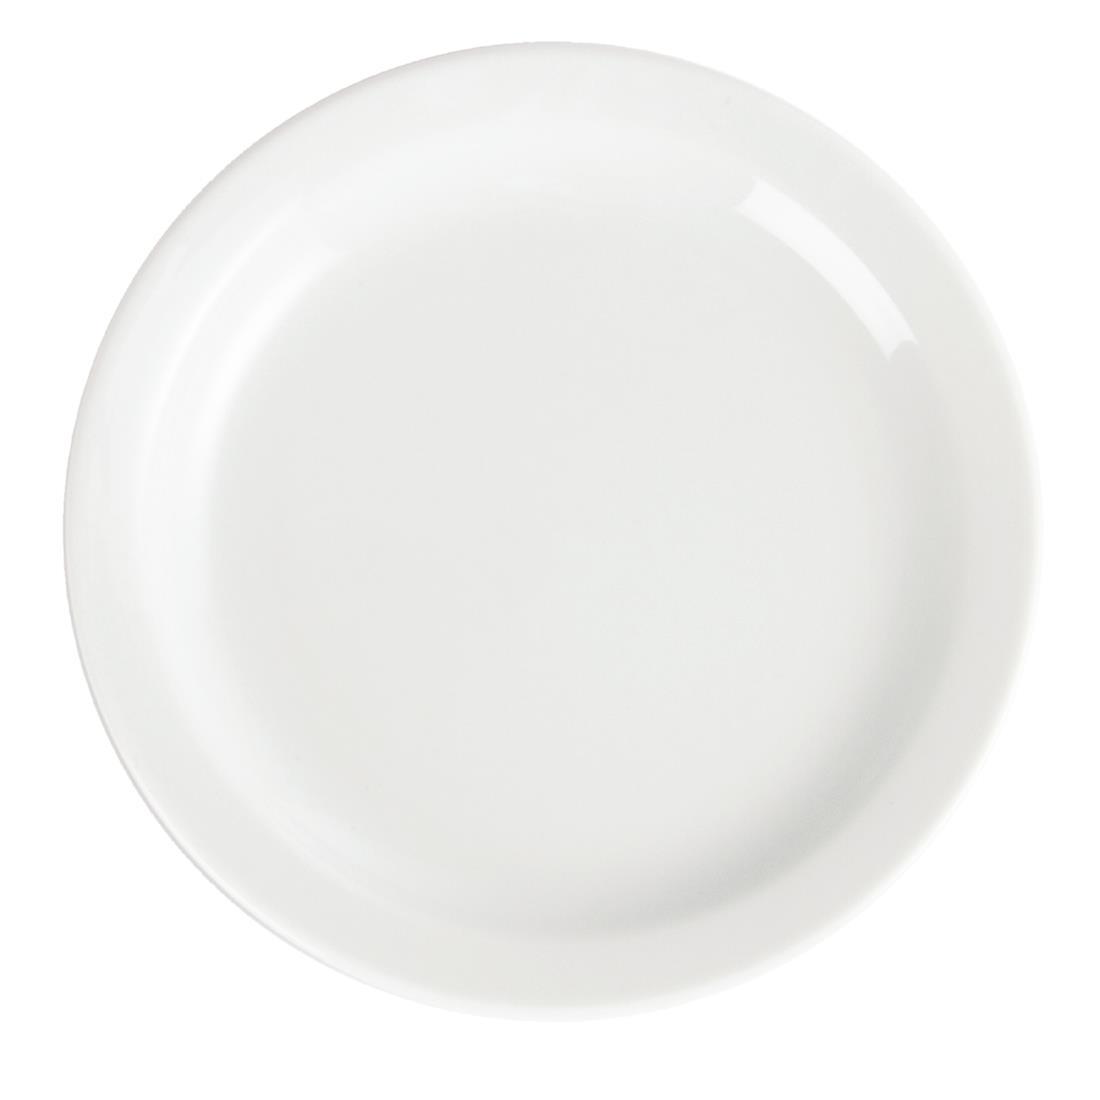 Olympia Whiteware Narrow Rimmed Plates 150mm (Pack of 12) - CB486  - 4